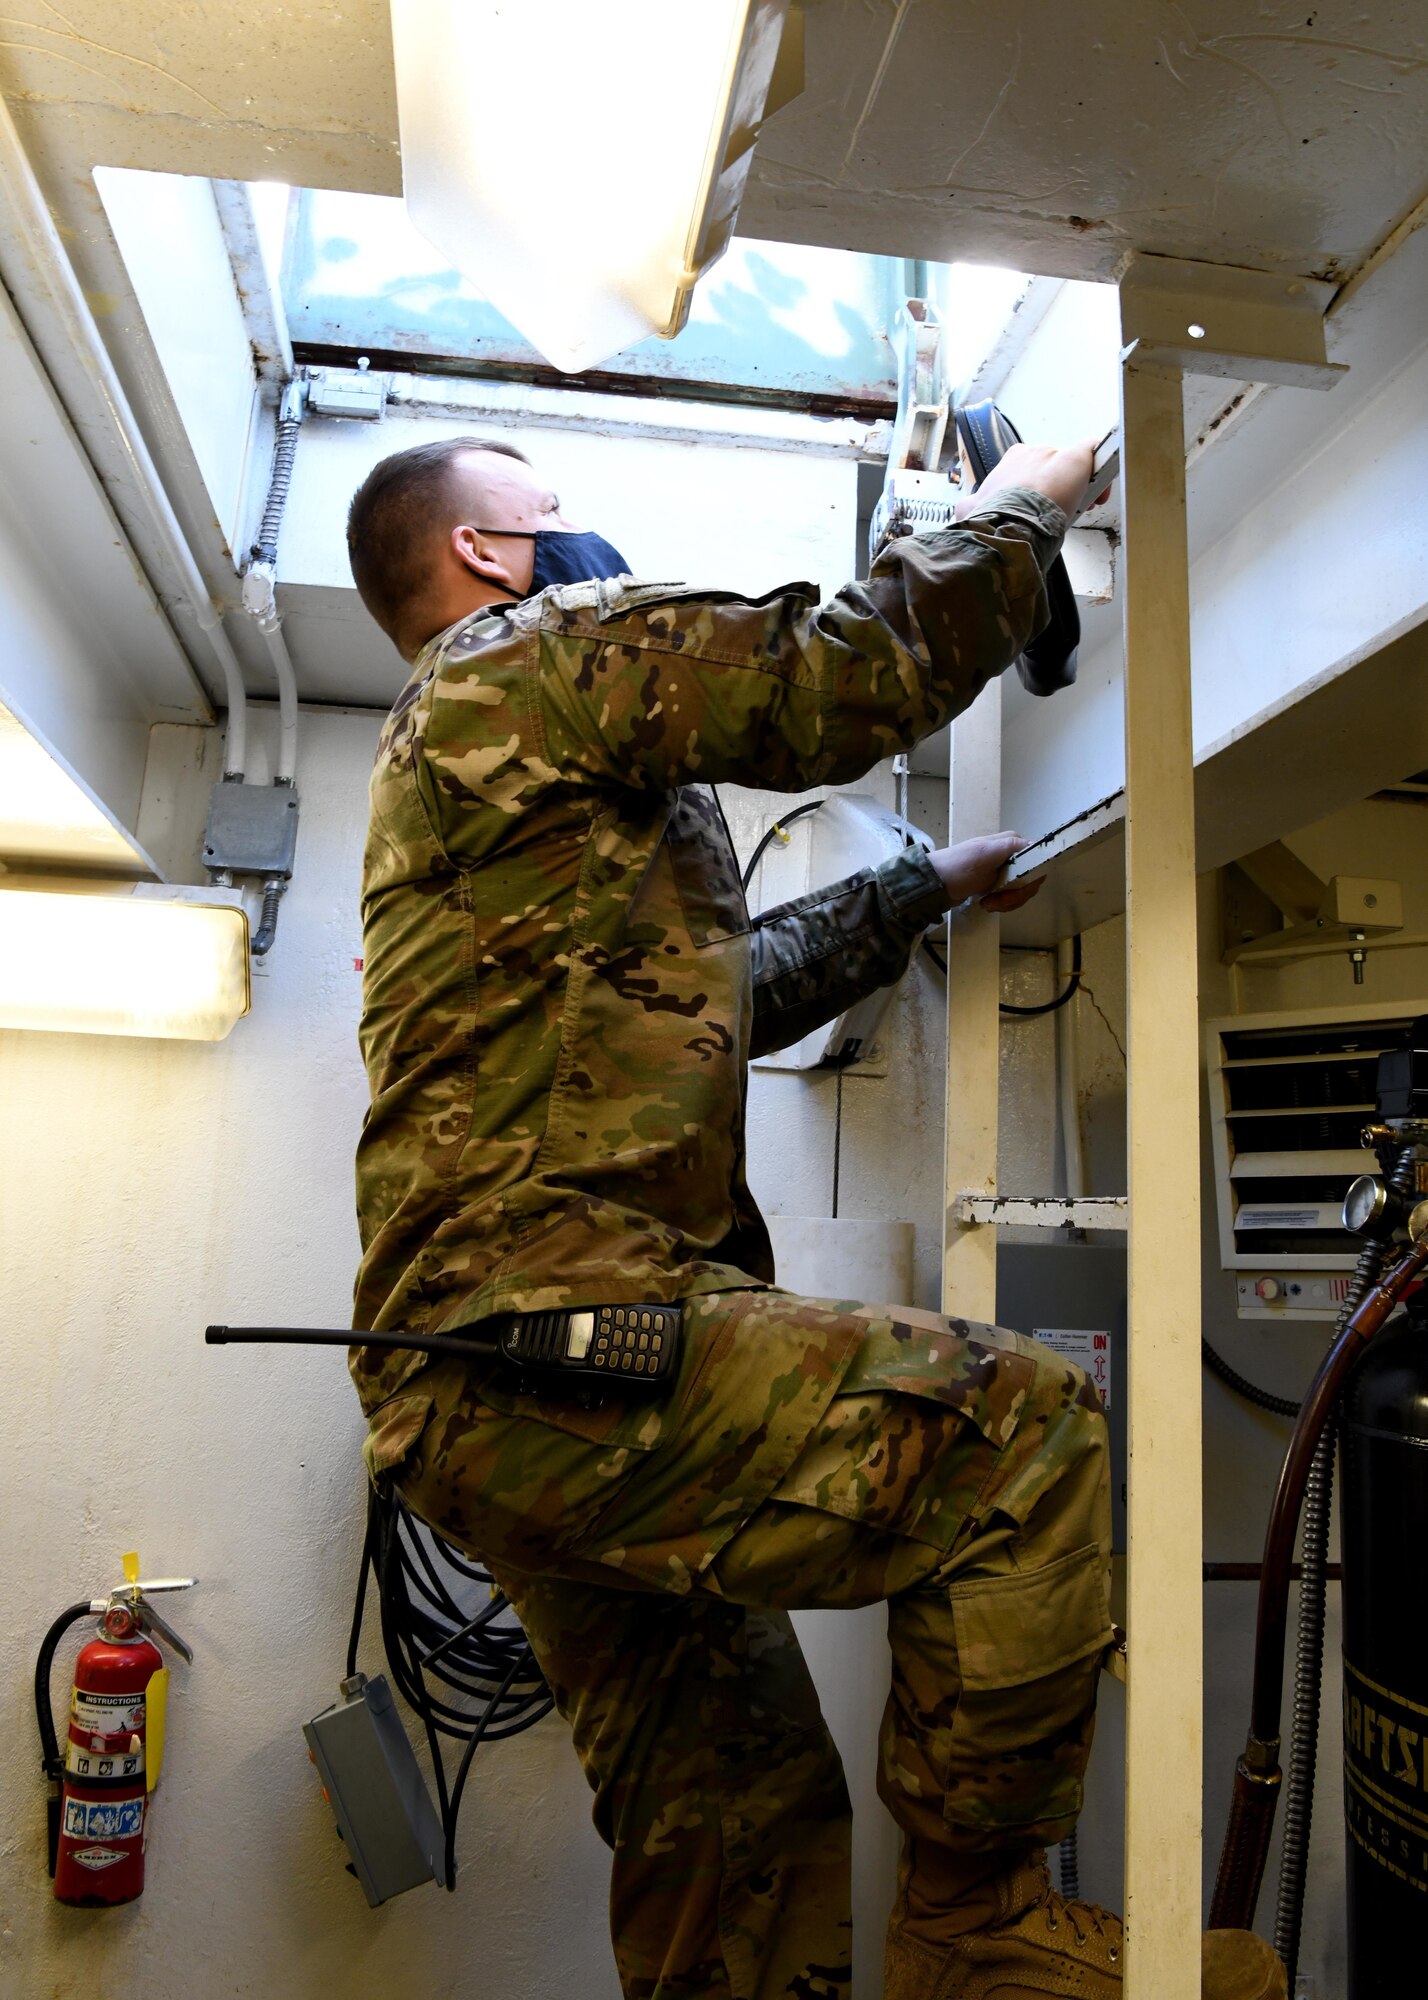 Tech. Sgt. Michael Reniewicz, 104th Fighter Wing power production shop leader, climbs out of a room containing arresting cables after performing routine maintenance December 10, 2020 at Barnes Air National Guard Base. (U.S. Air National Guard Photo by Airman 1st Class Camille Lienau